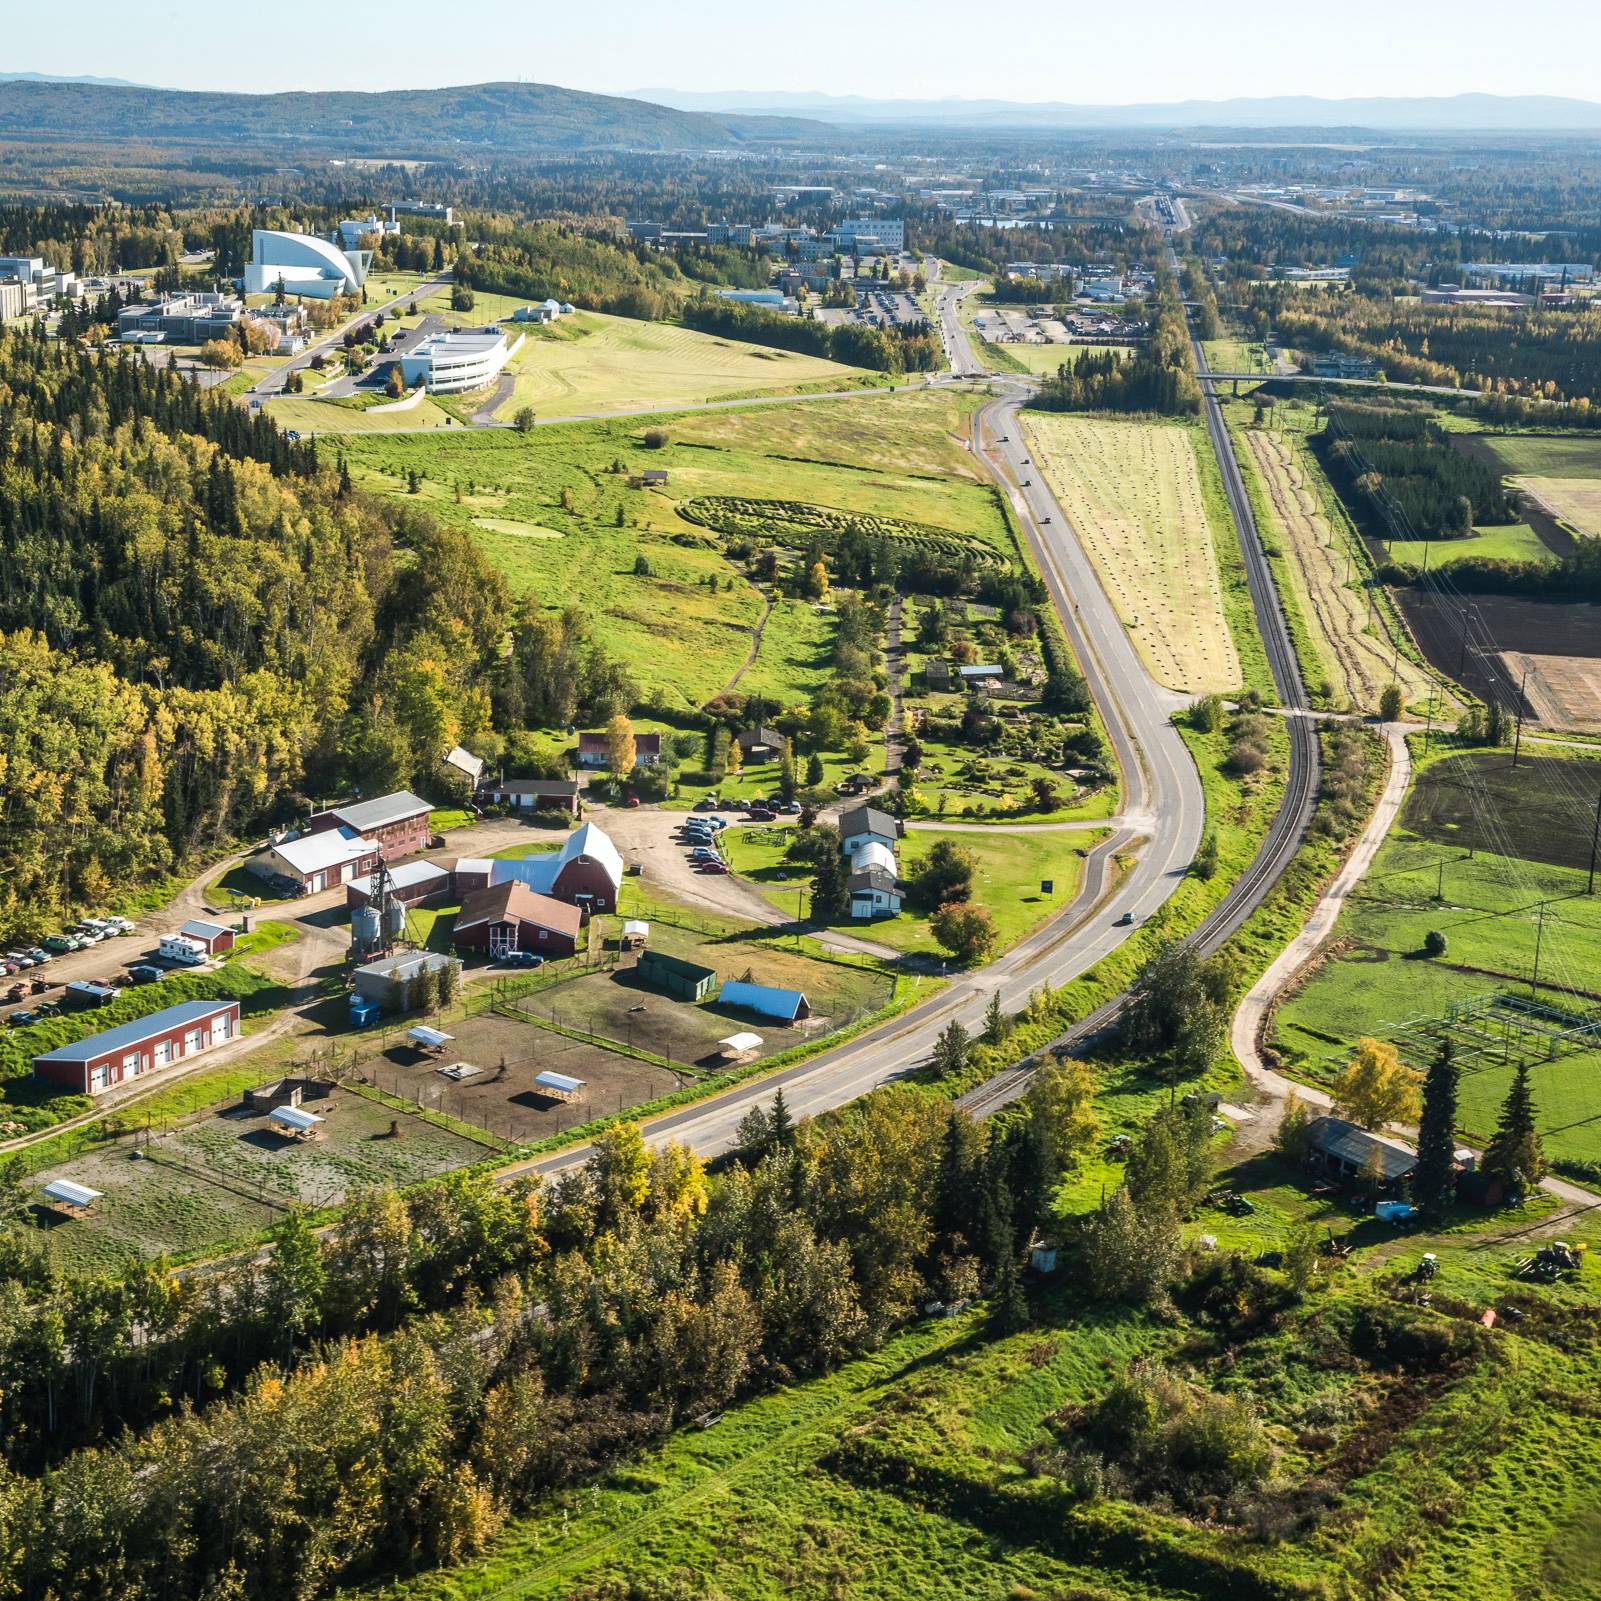 Aerial view of the Fairbanks Experimental Farm with UAF campus and hills behind it